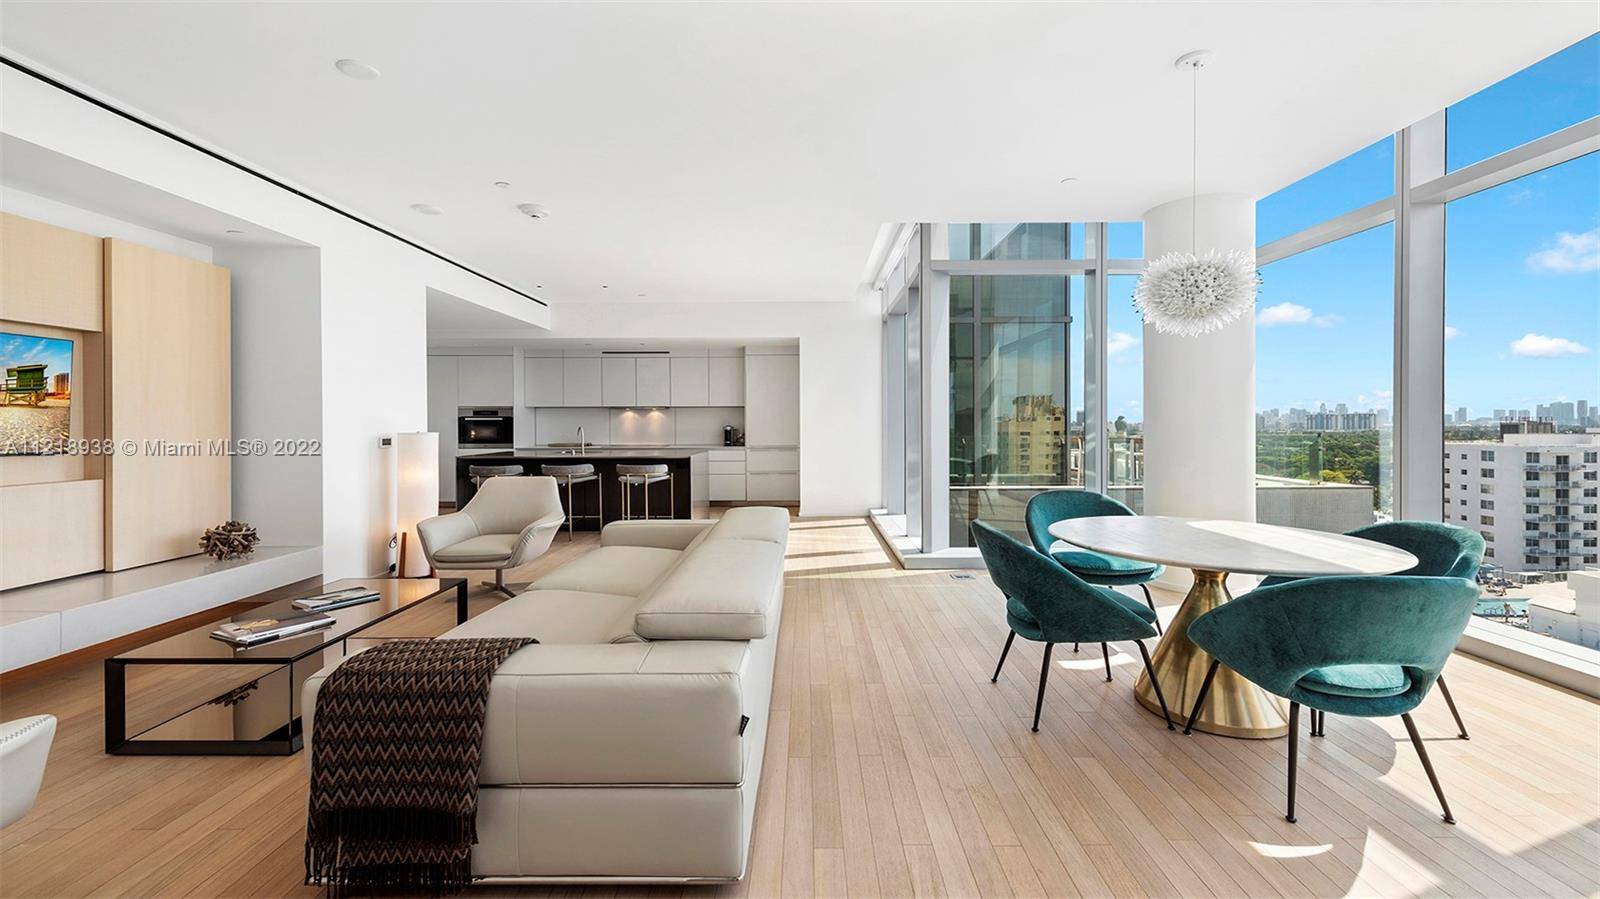 Beautiful 1 bedroom, 1. 5 bathrooms unit on the 14th floor of the private residences at the Edition.